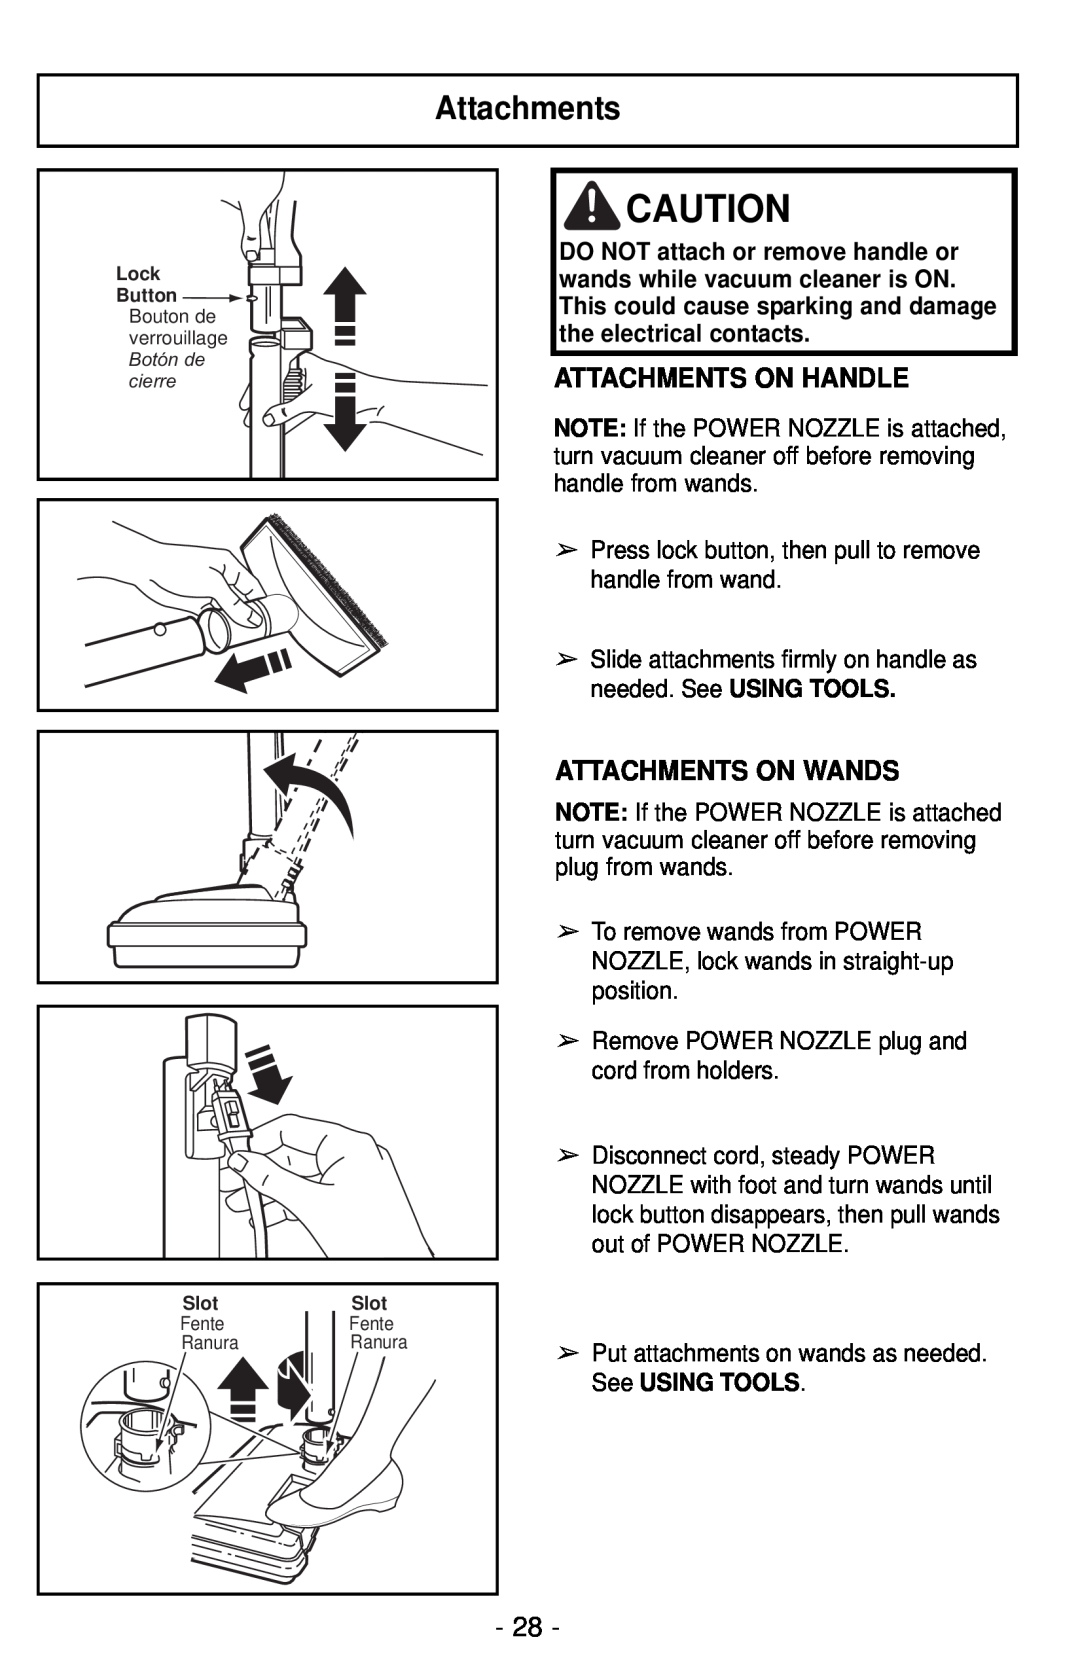 Panasonic MC-CG901 operating instructions Attachments On Handle, Attachments On Wands 